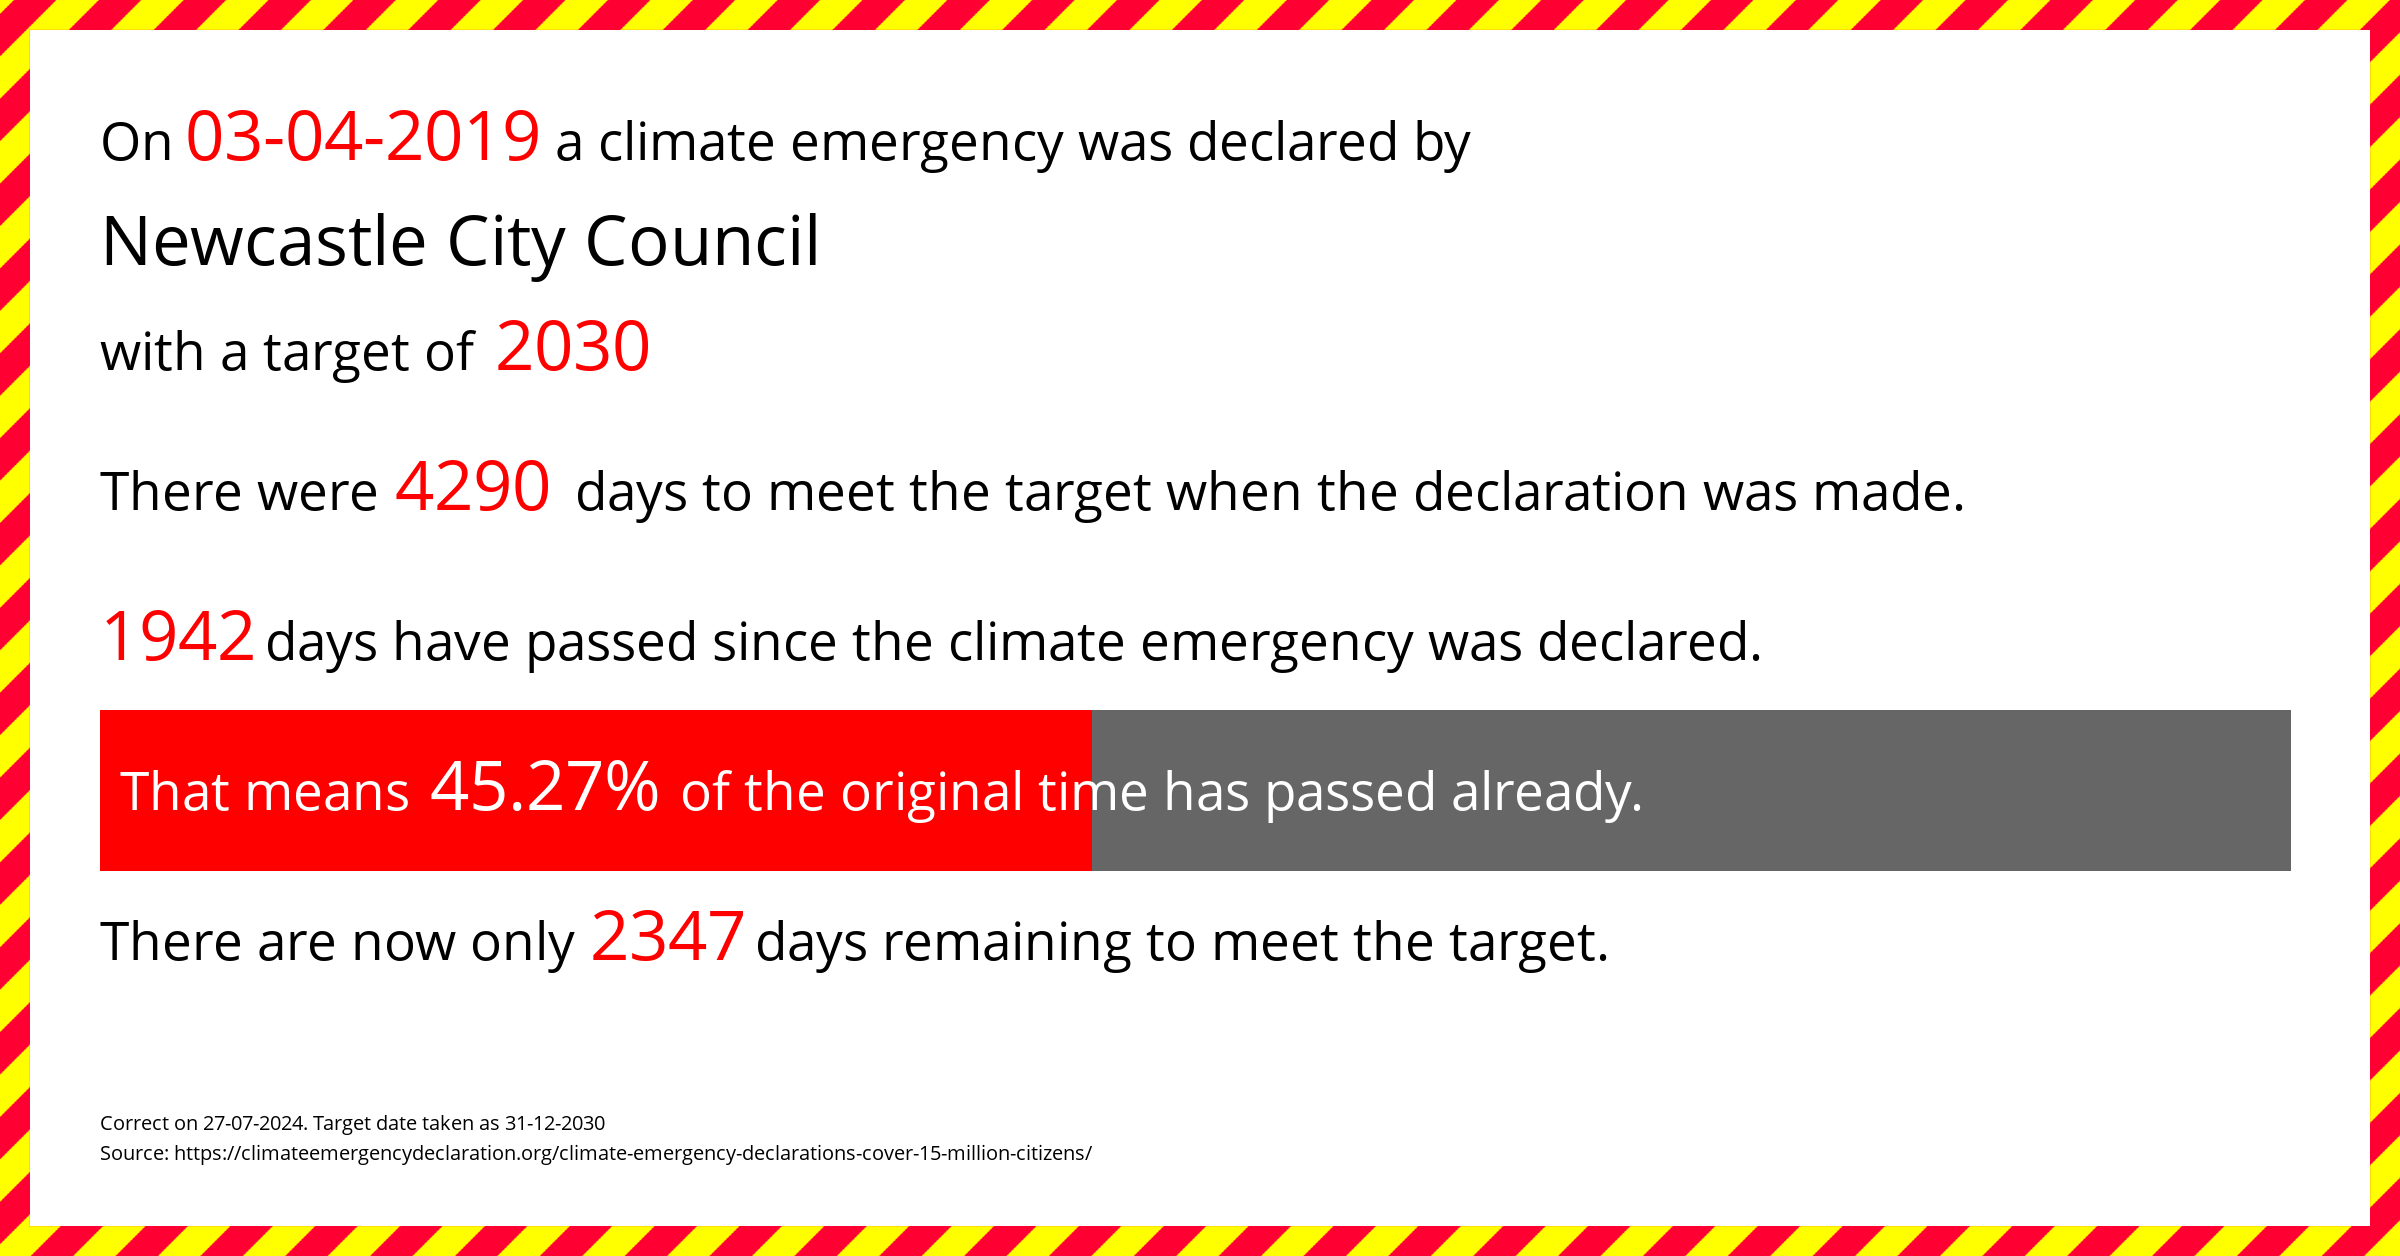 Newcastle City Council declared a Climate emergency on Wednesday 3rd April 2019, with a target of 2030.